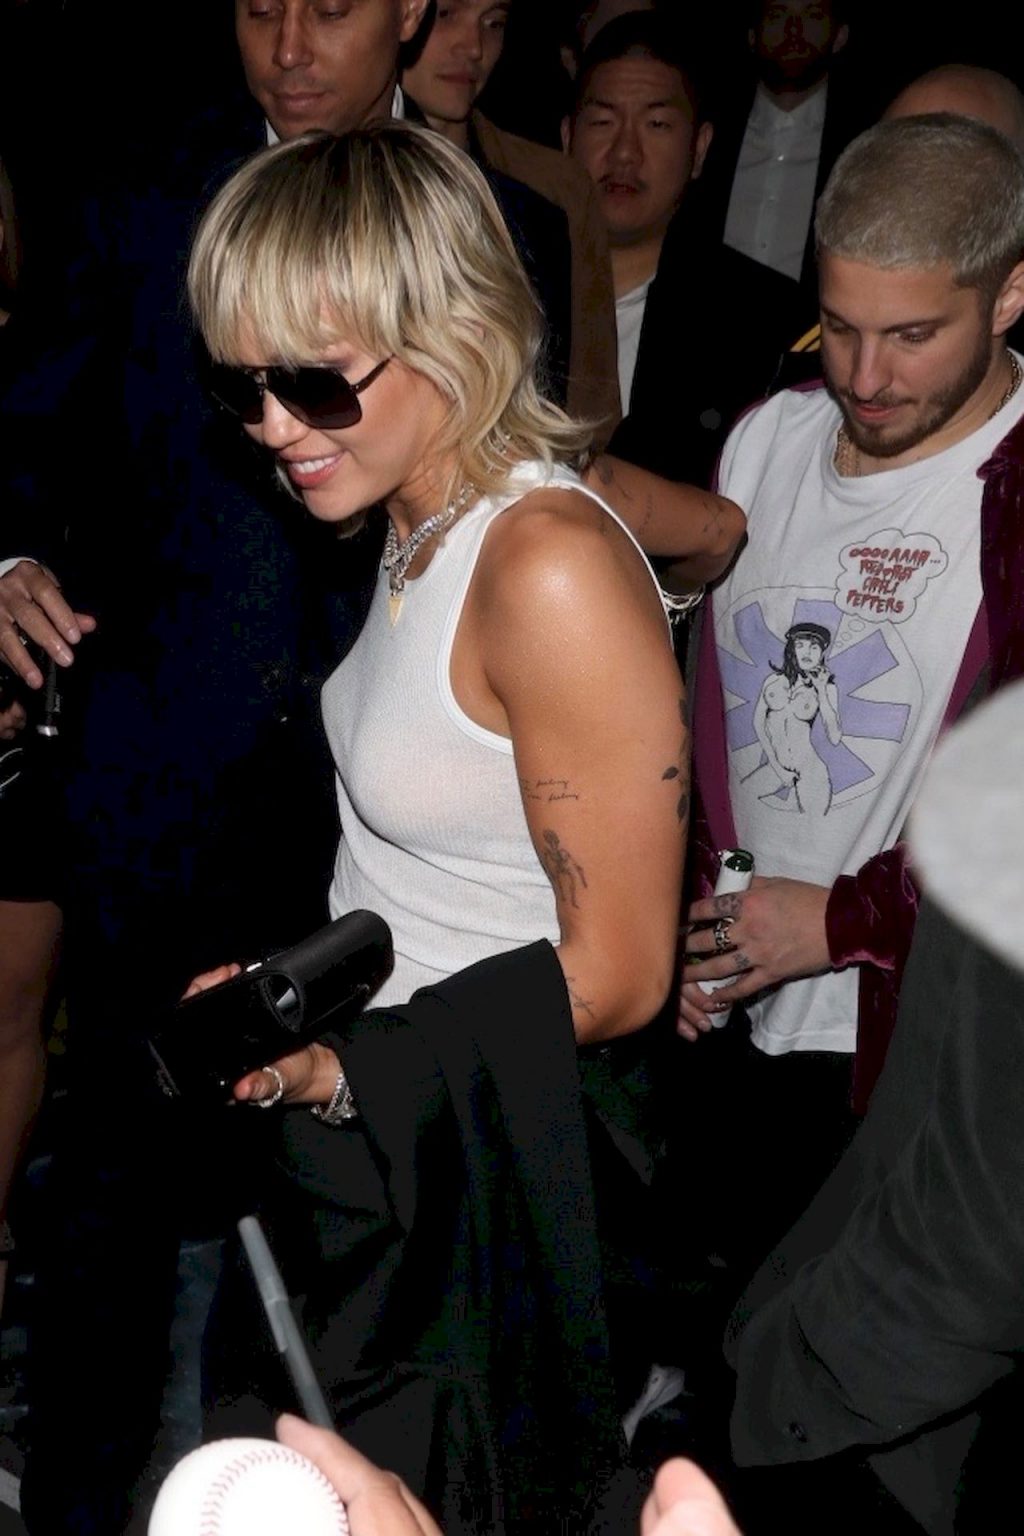 Miley Cyrus Leaves Chateau Marmont Wearing a Plain White Tank Top (30 Photos)